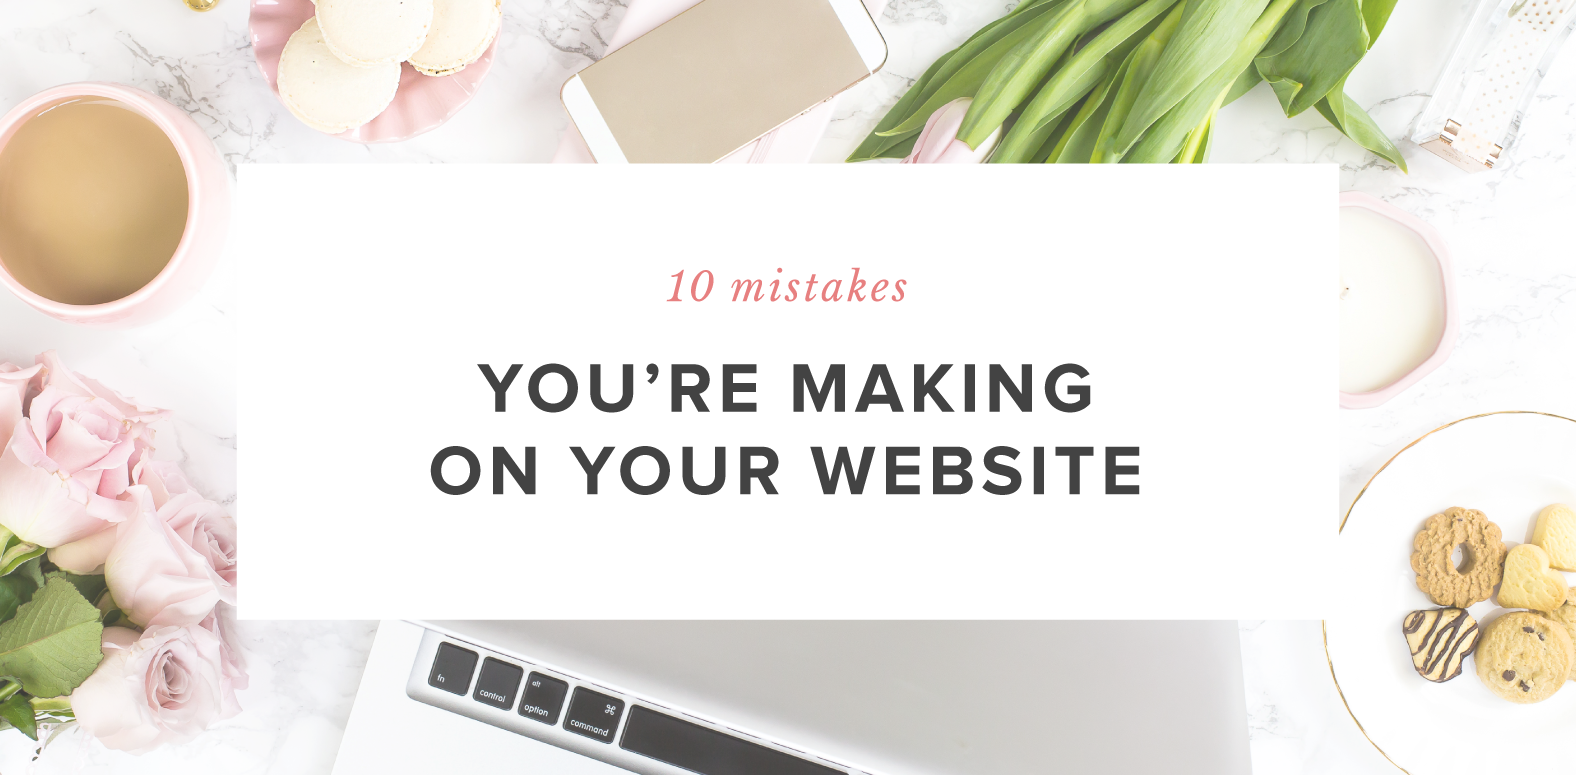 10 Mistakes You're Making on Your Website